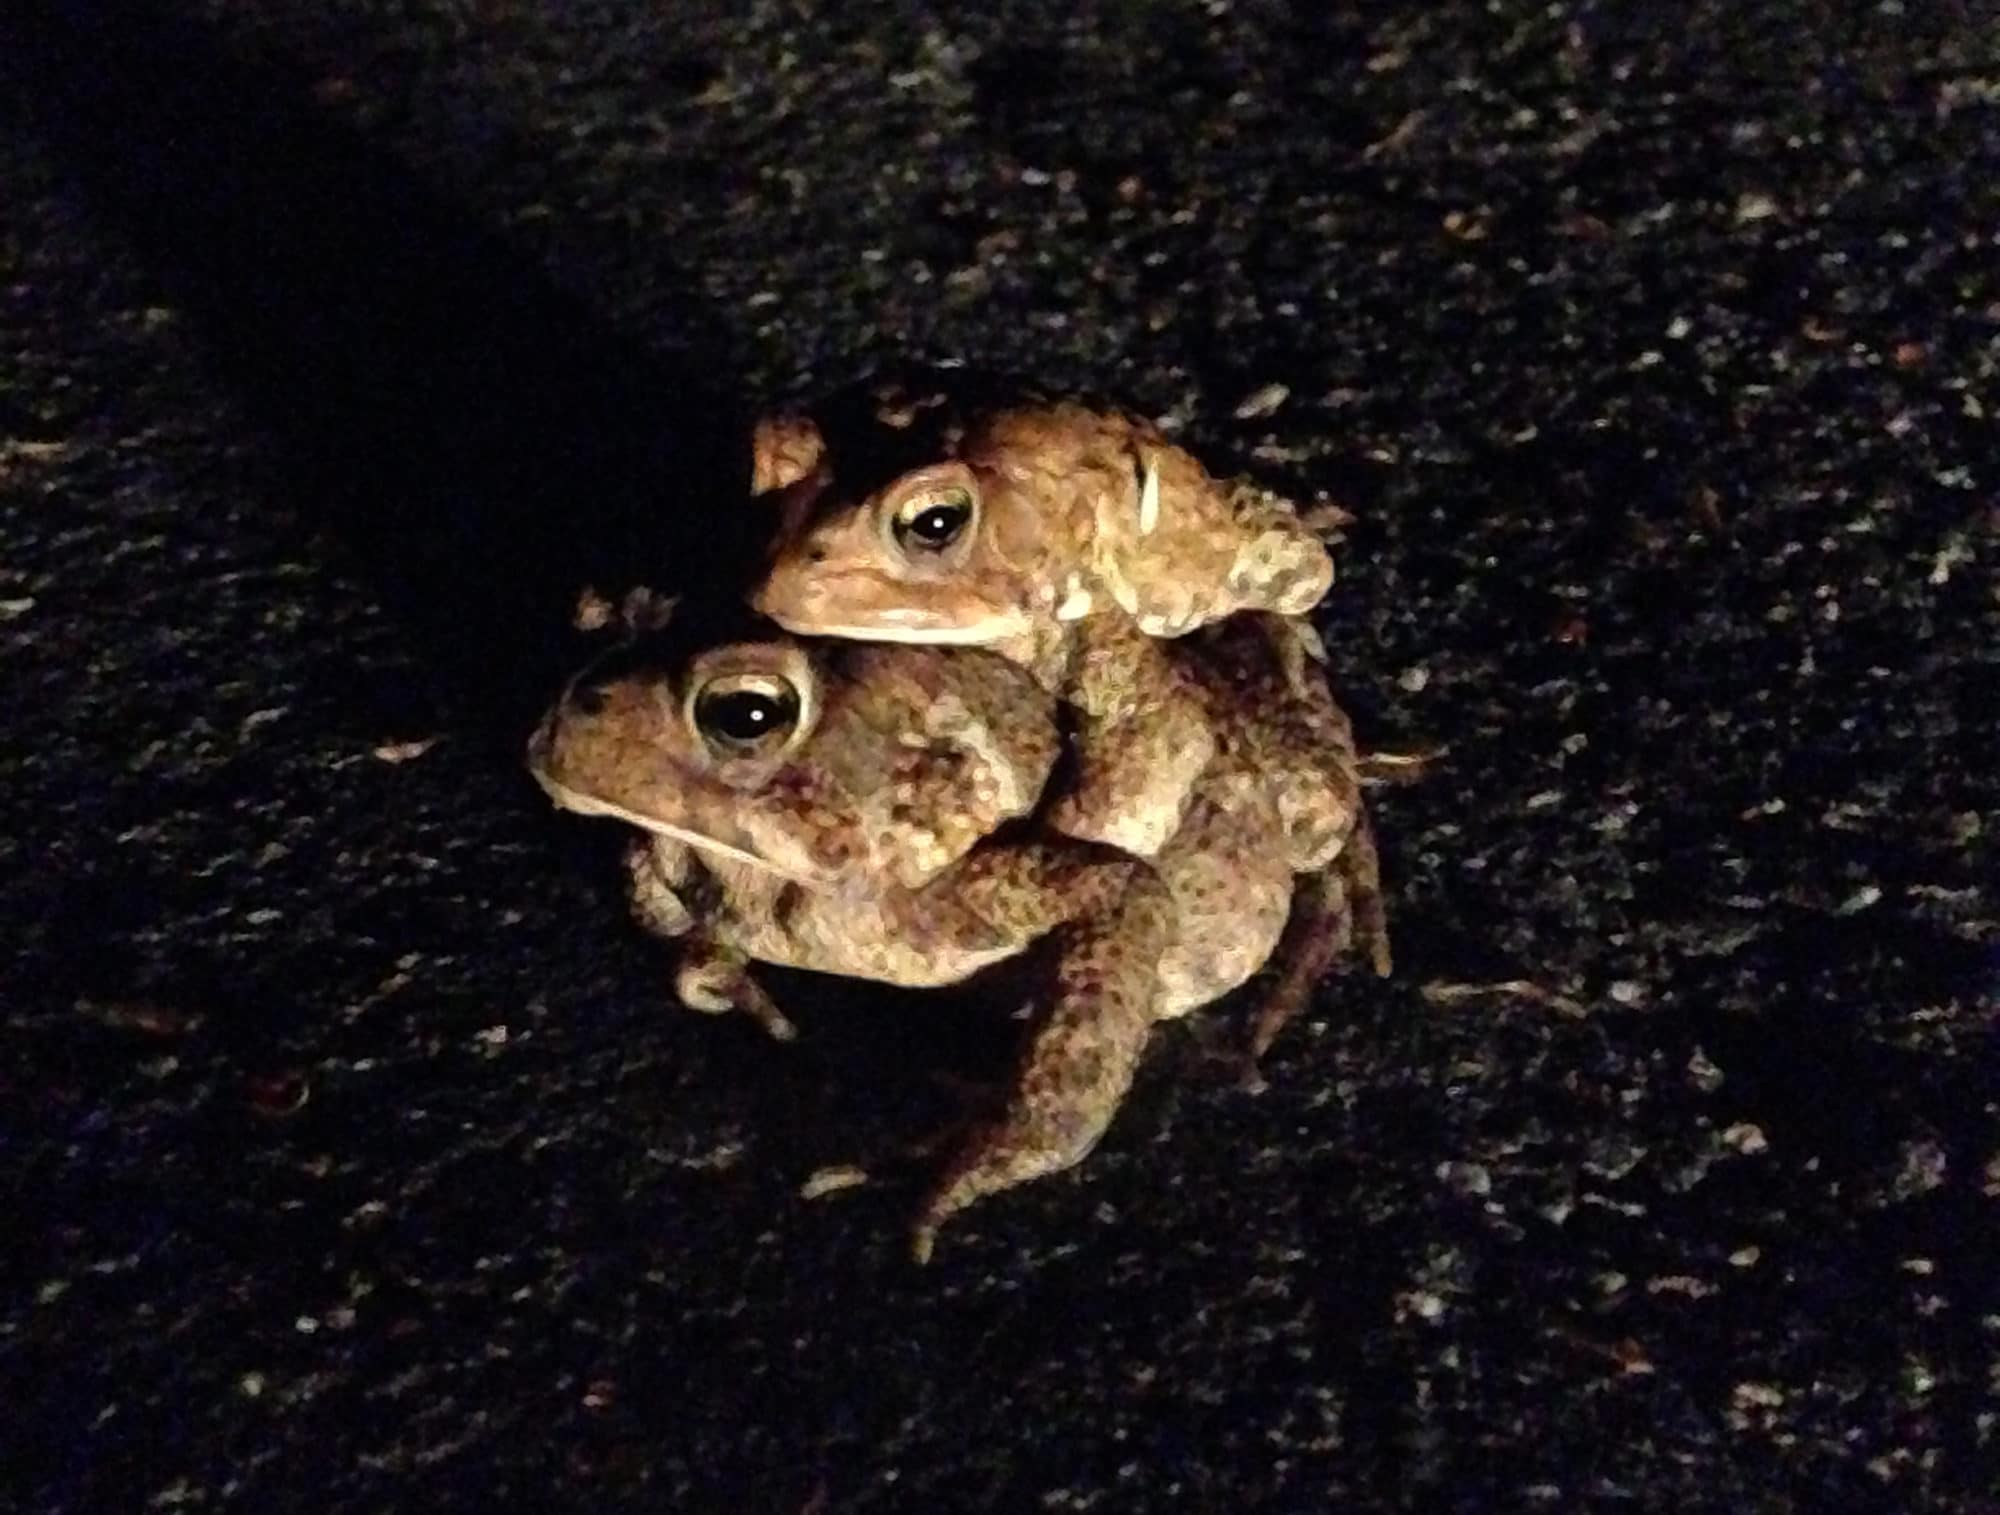 Toads in amplexus on Route 123 in Hancock. (photo © Jess Dude)